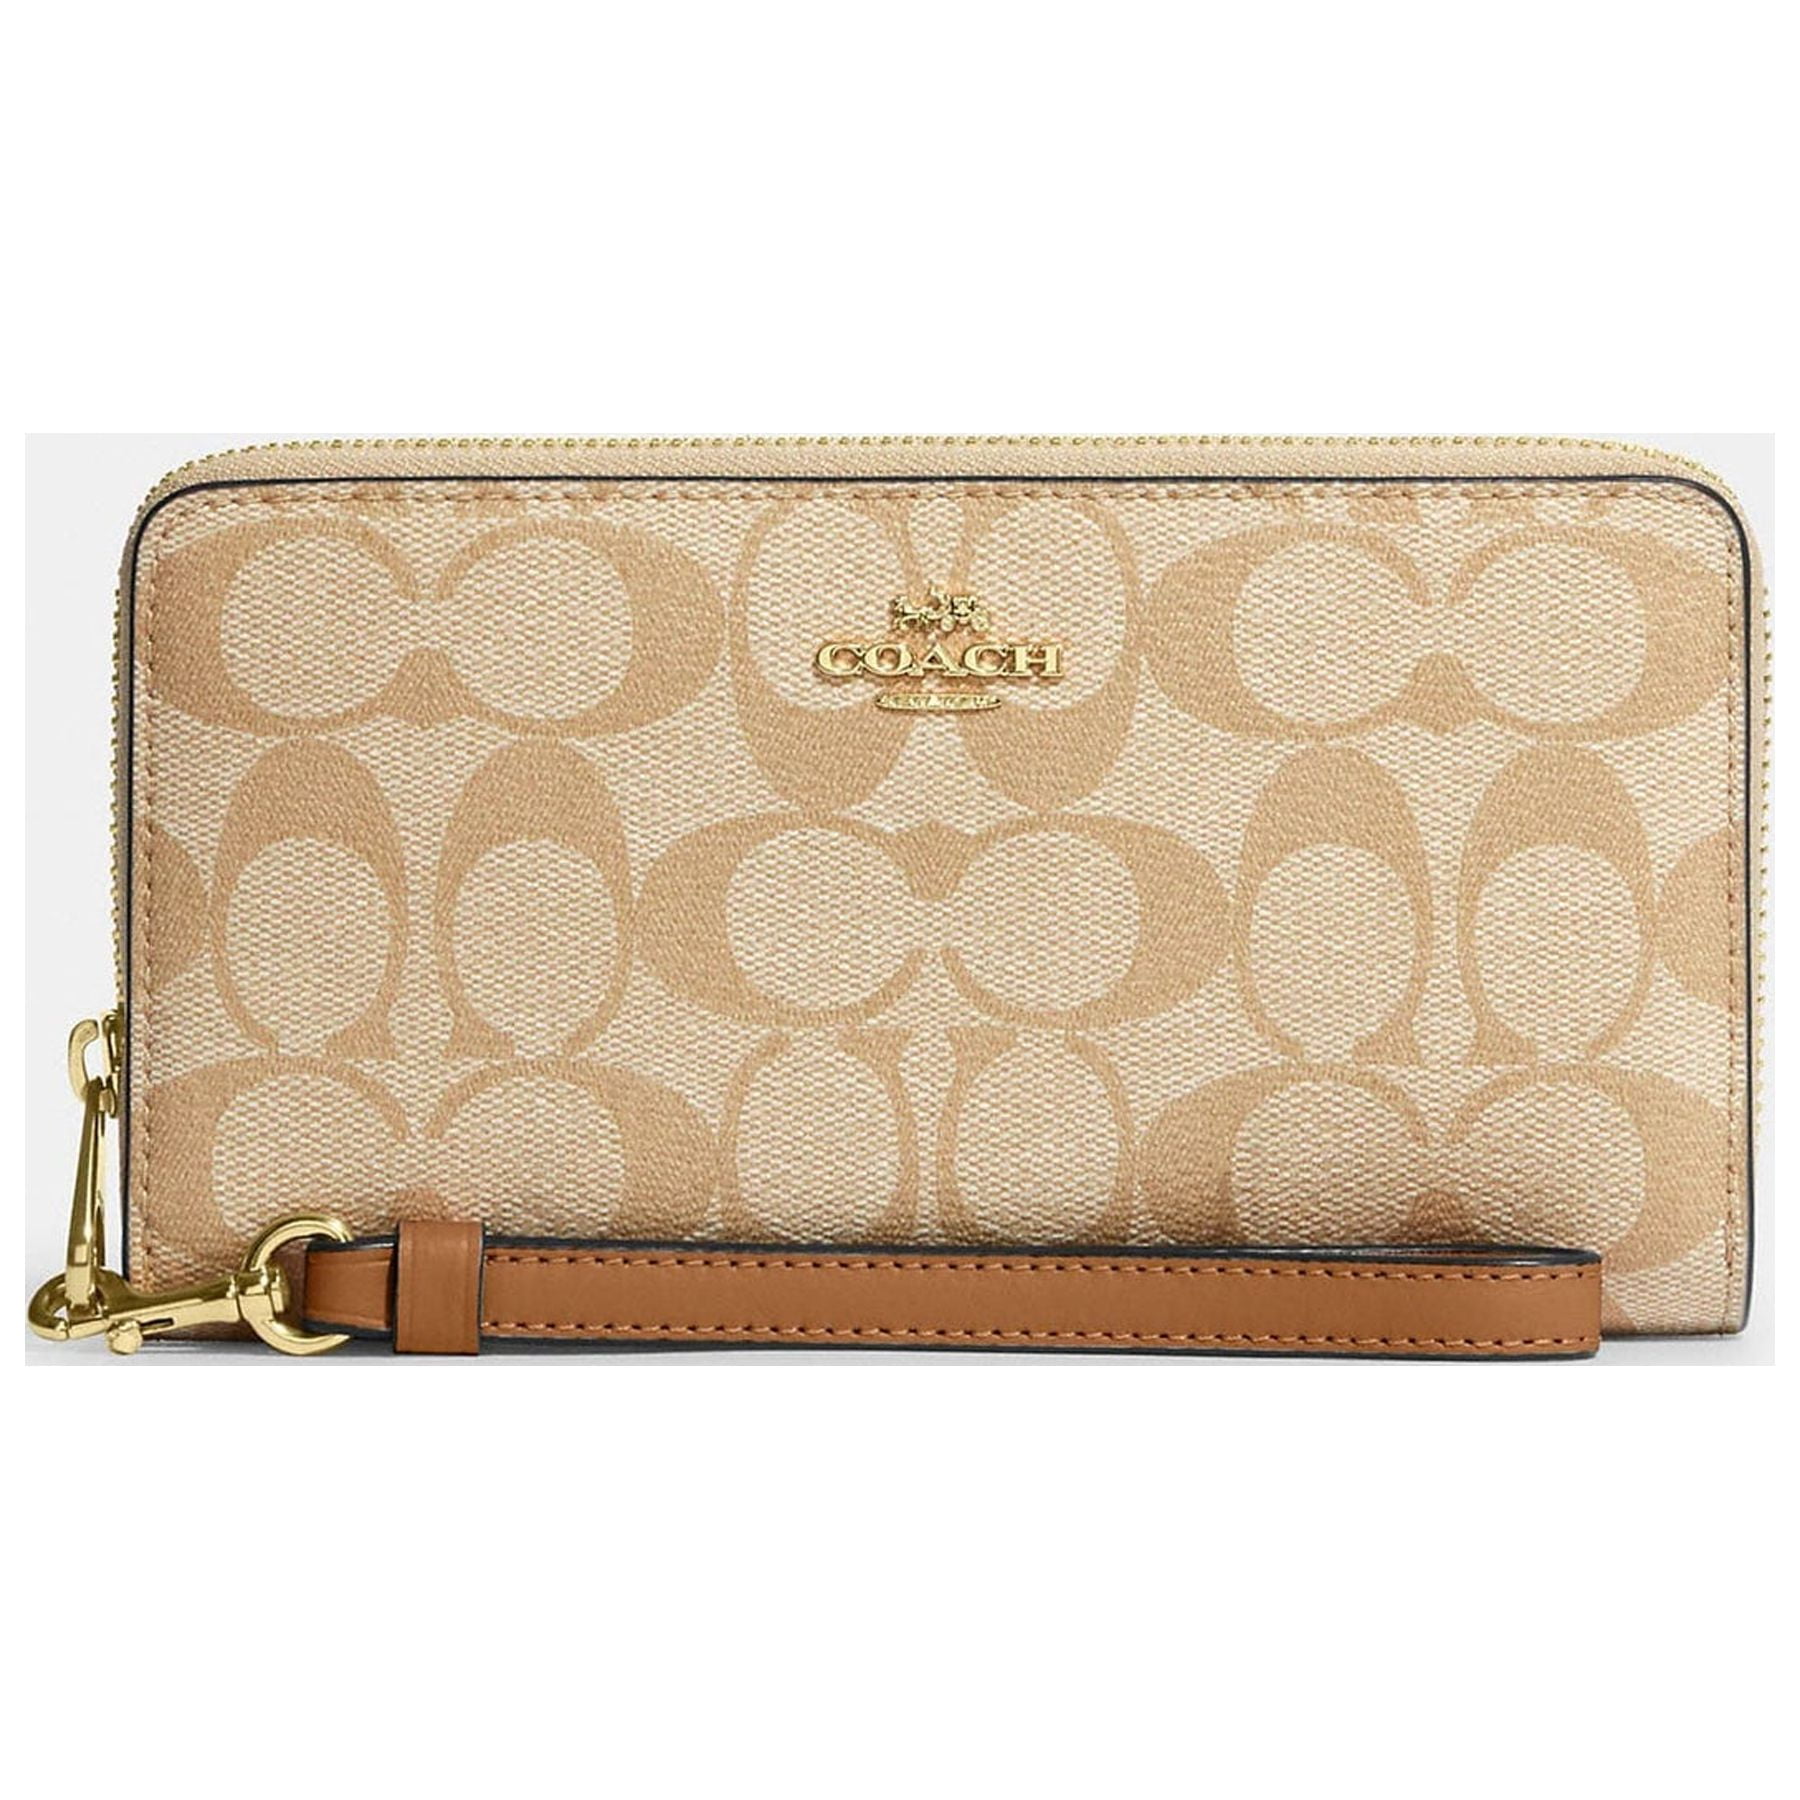 Coach Long Zip Around Wallet In Signature Canvas in Light Khaki/Saddle